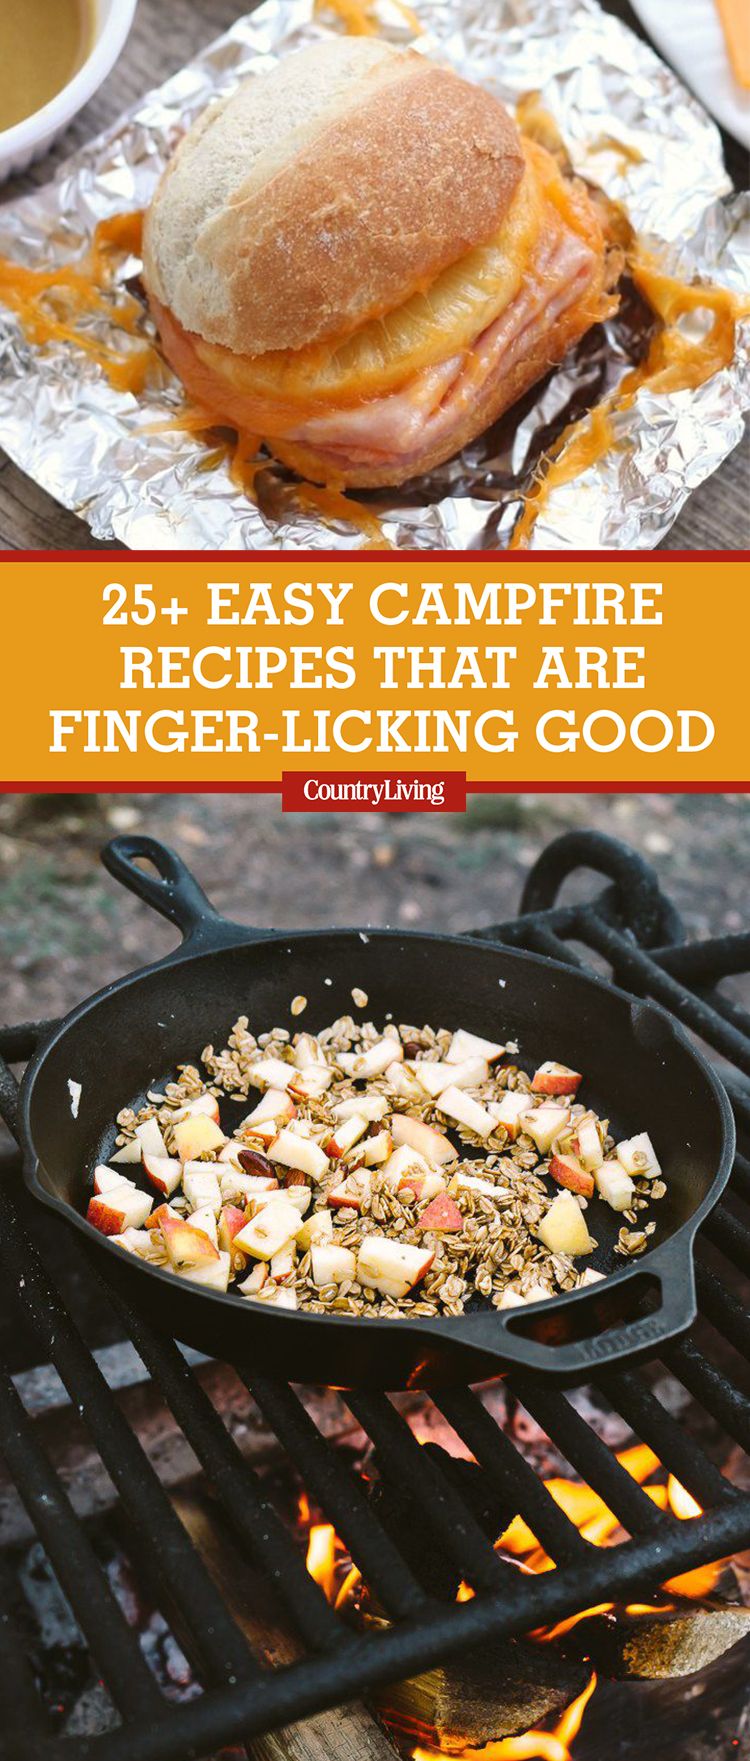 39 Best Campfire Recipes - Easy Camping Food Ideas